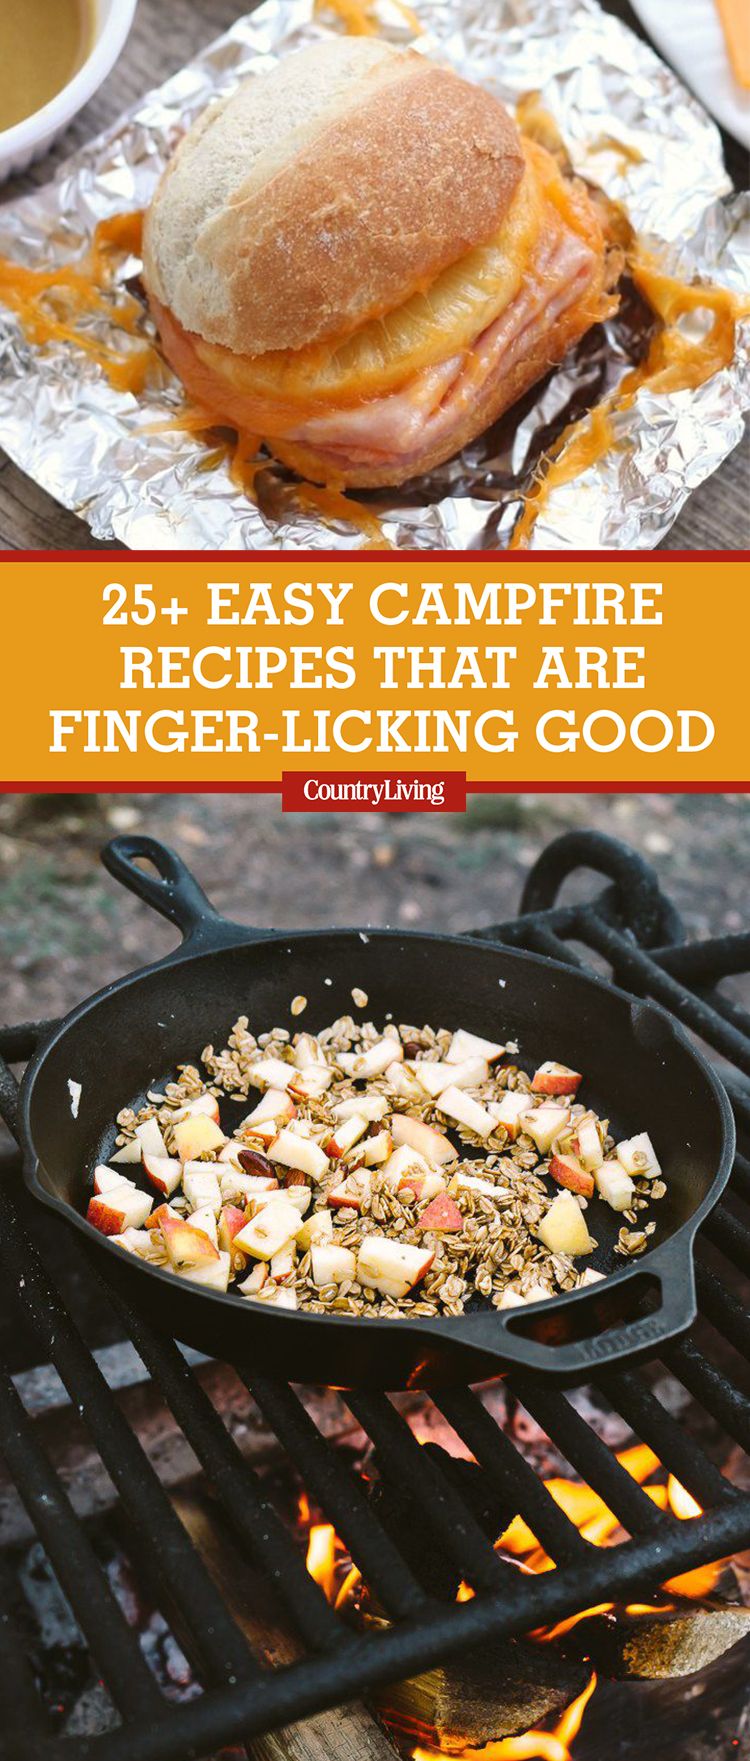 39 Best Campfire Recipes - Easy Camping Food Ideas